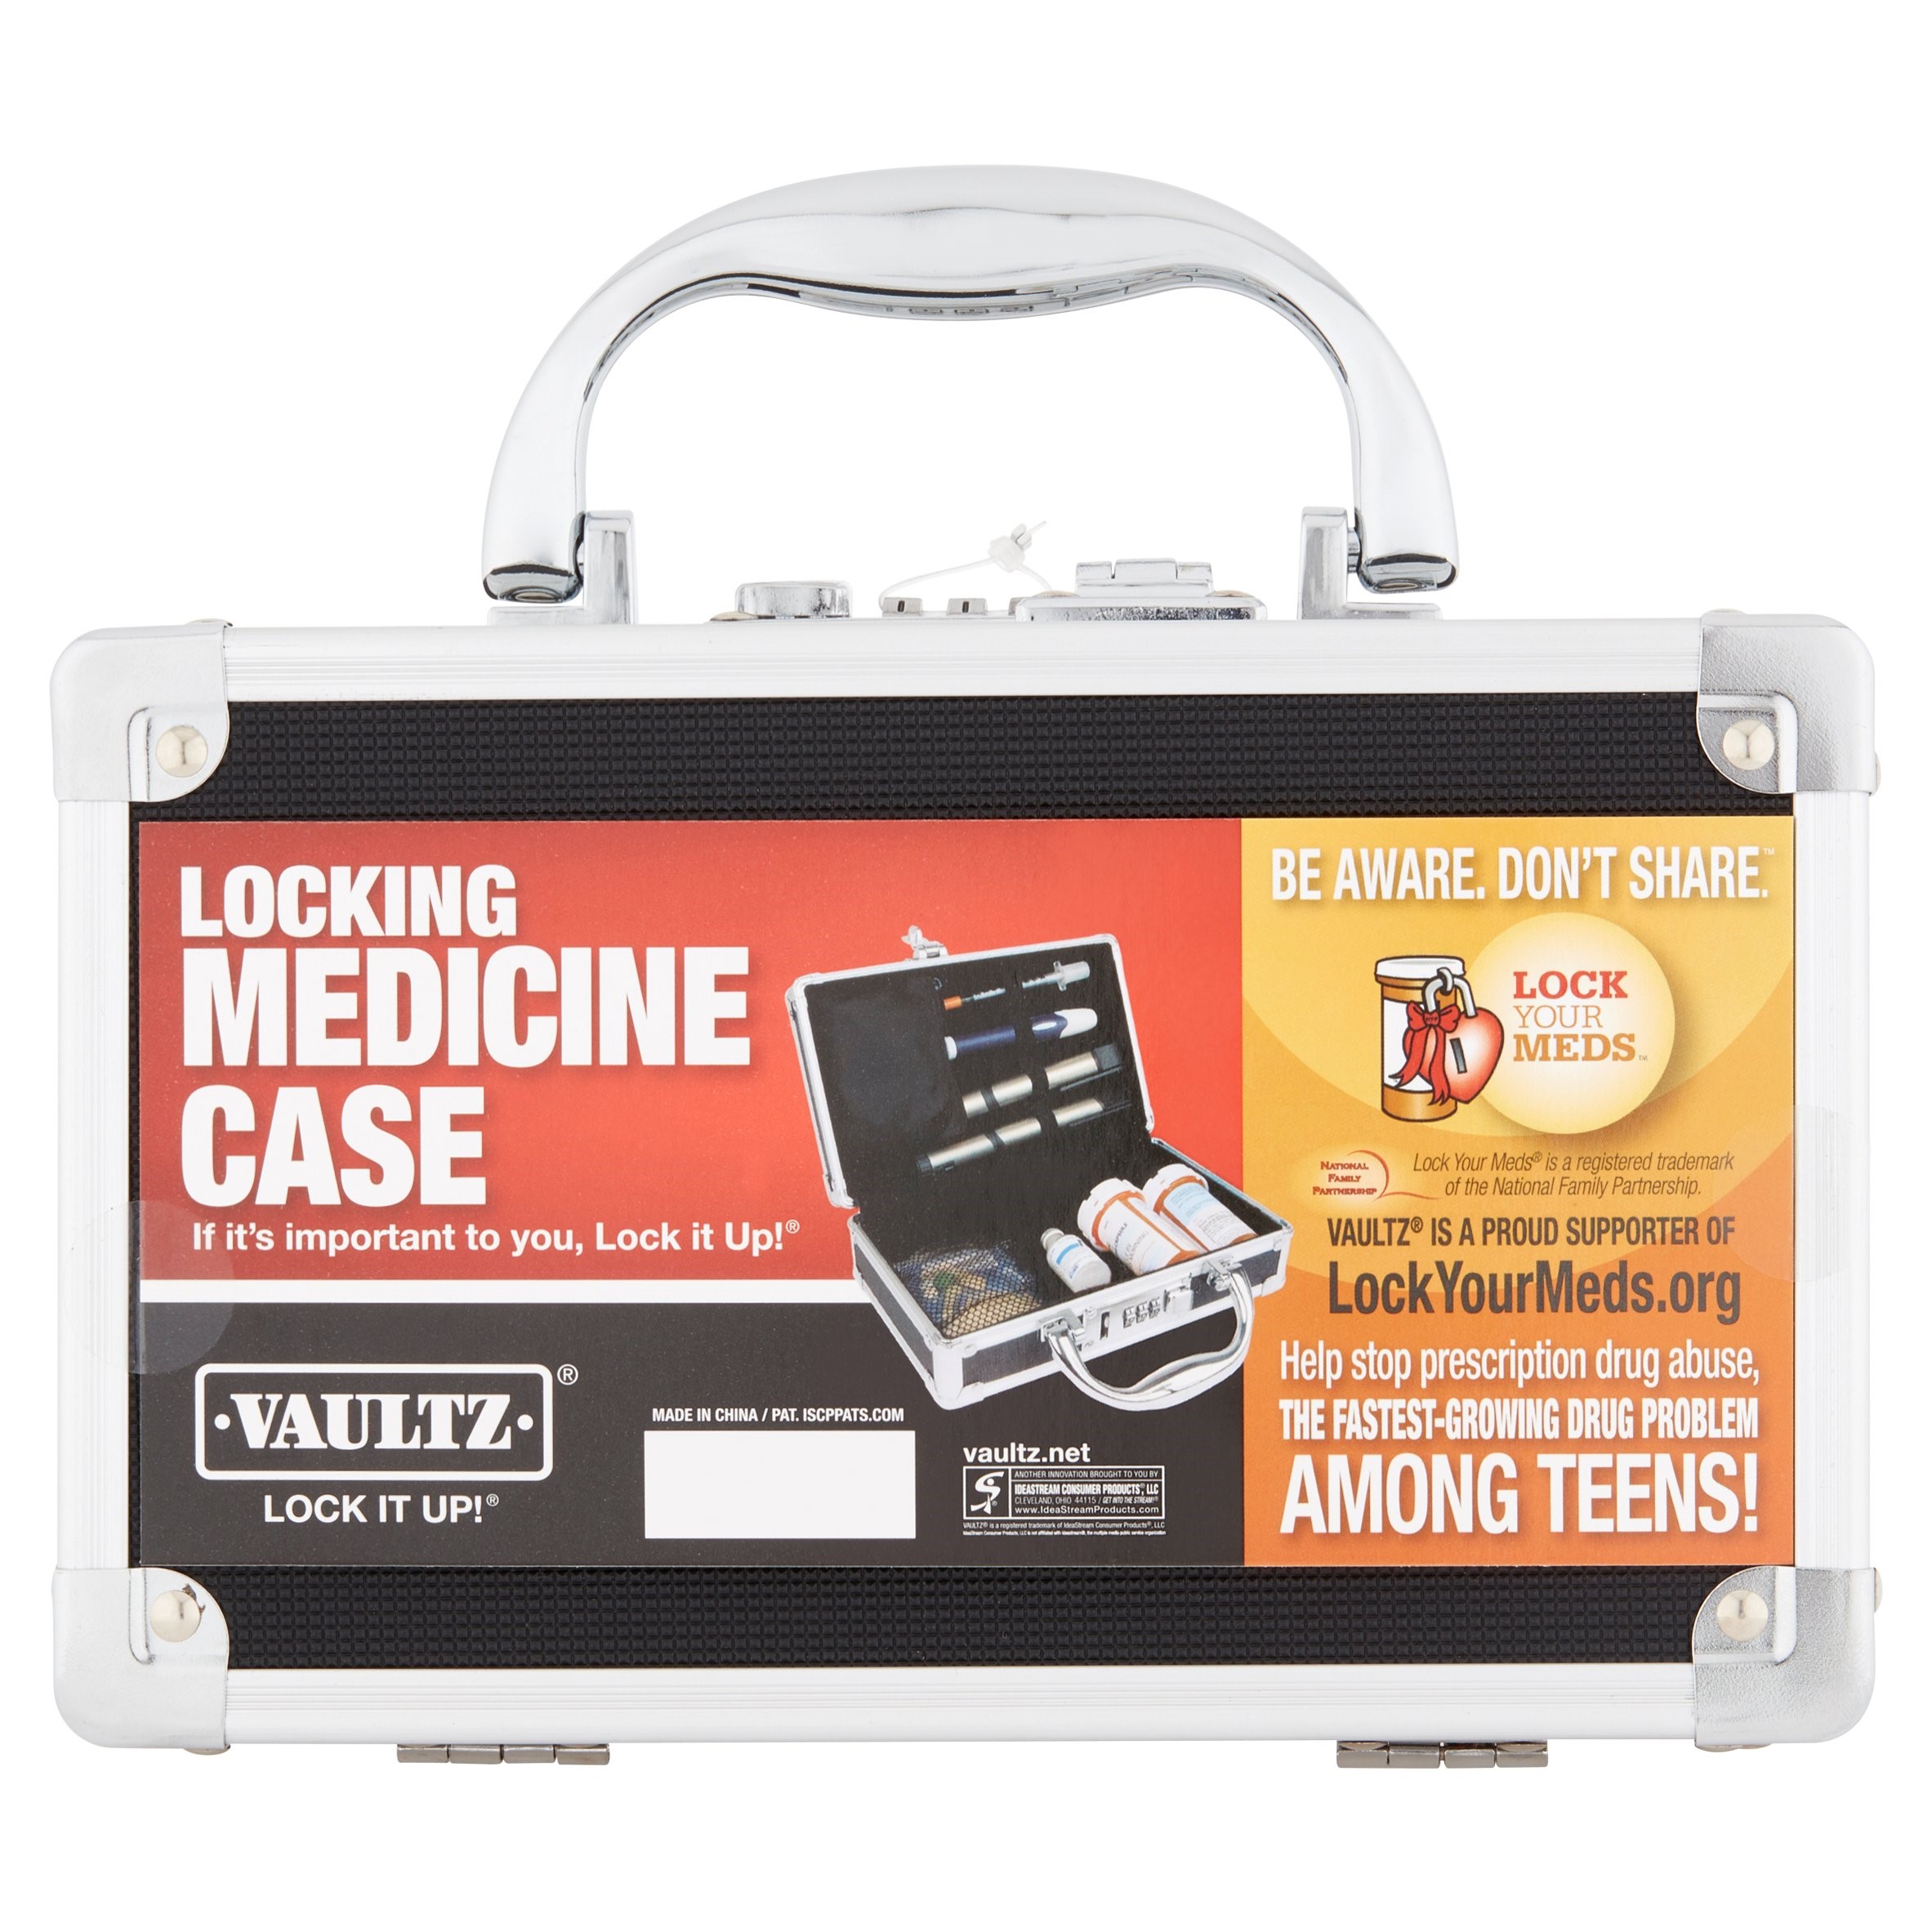 Vaultz Locking Medicine Case by IdeaStream Consumer Products - Safe And Secure Pill Organizer, VZ00361 - image 1 of 8